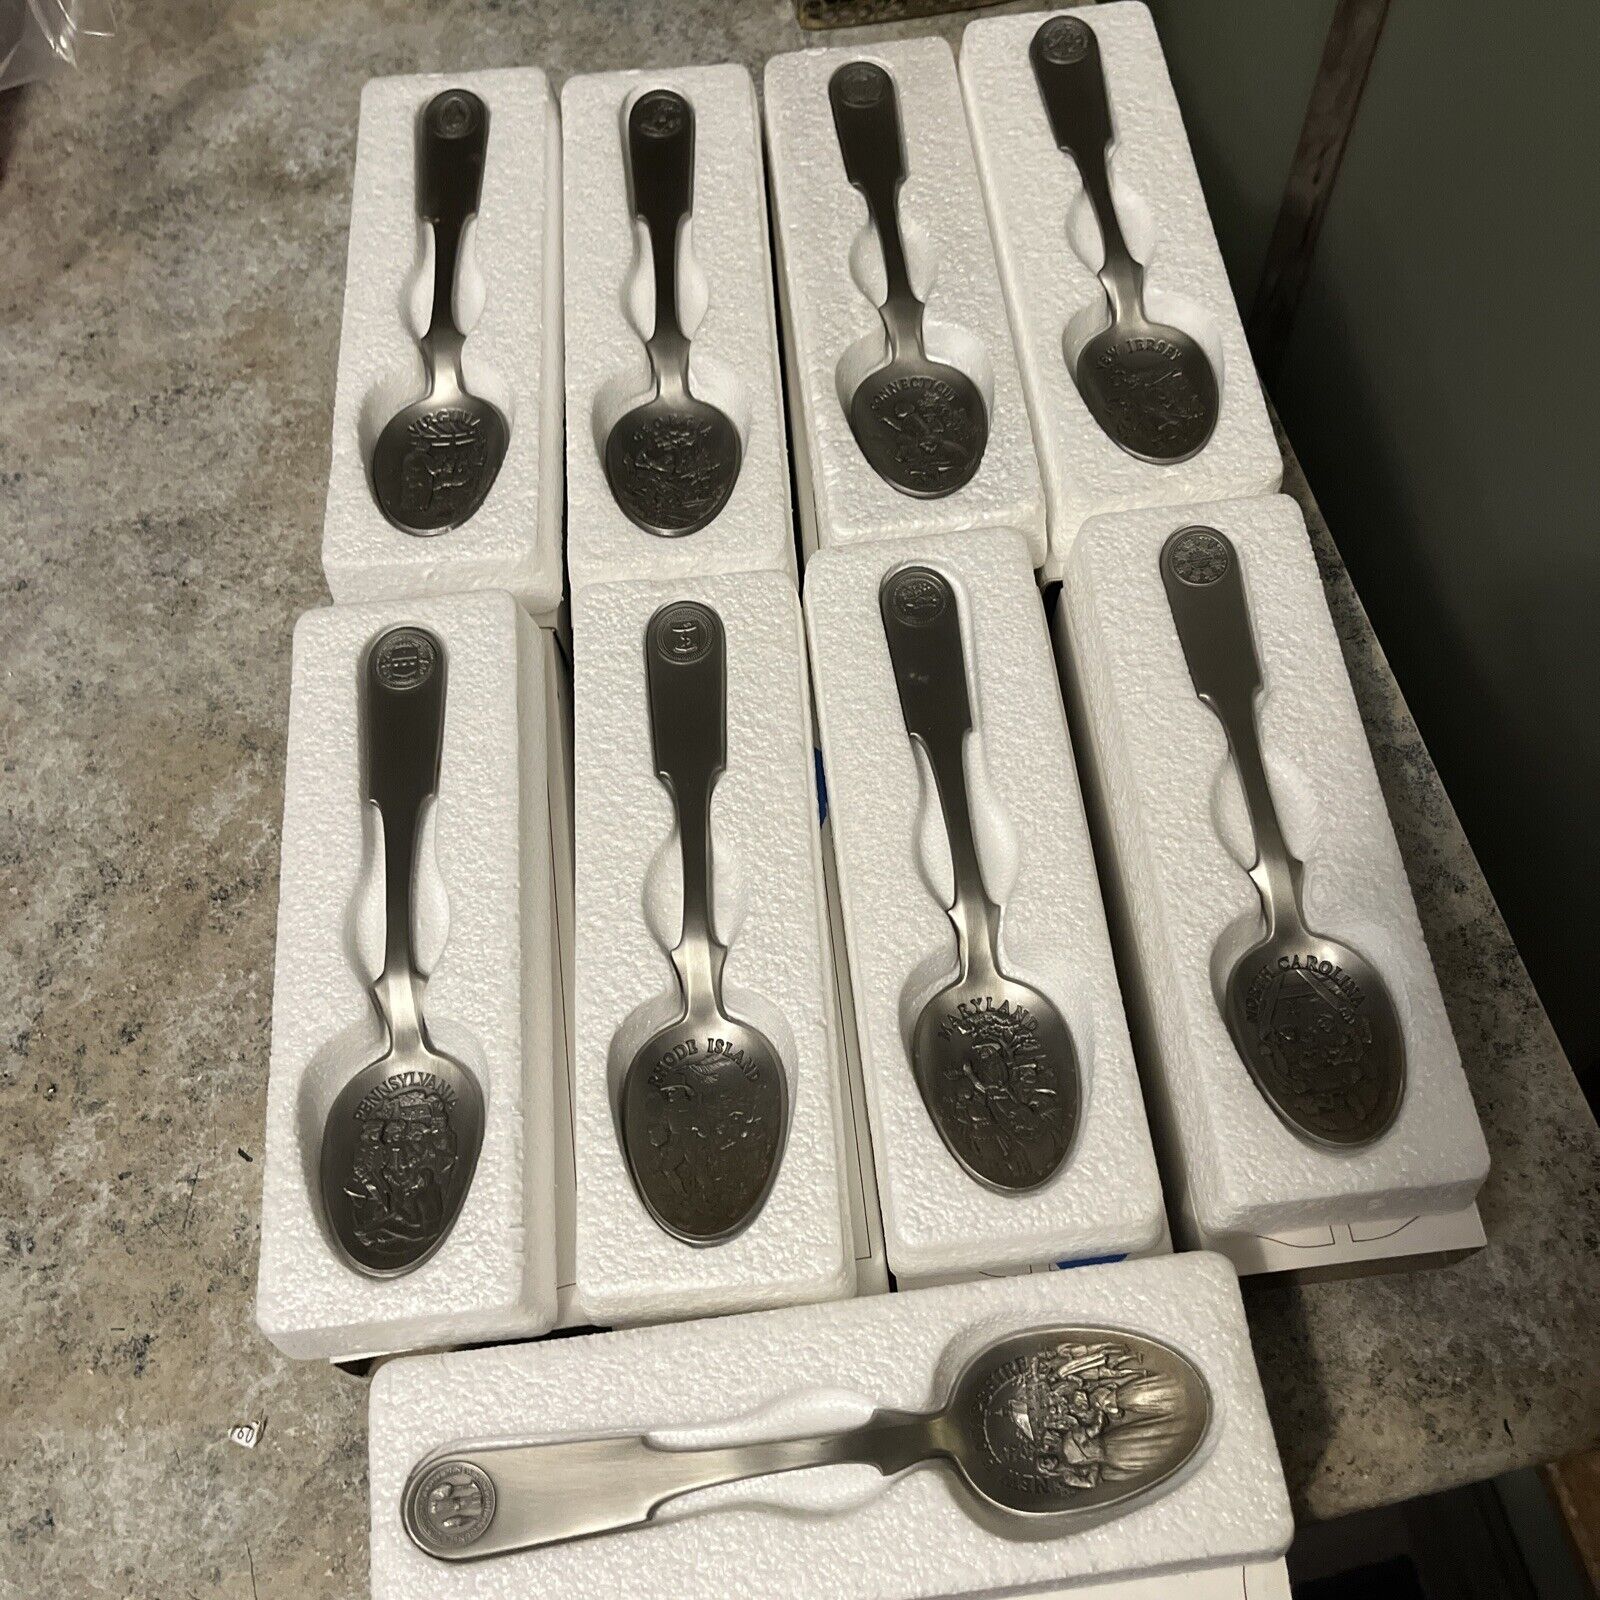 Franklin Mint “The American Colonies 9 ￼Pewter Spoons Collection￼